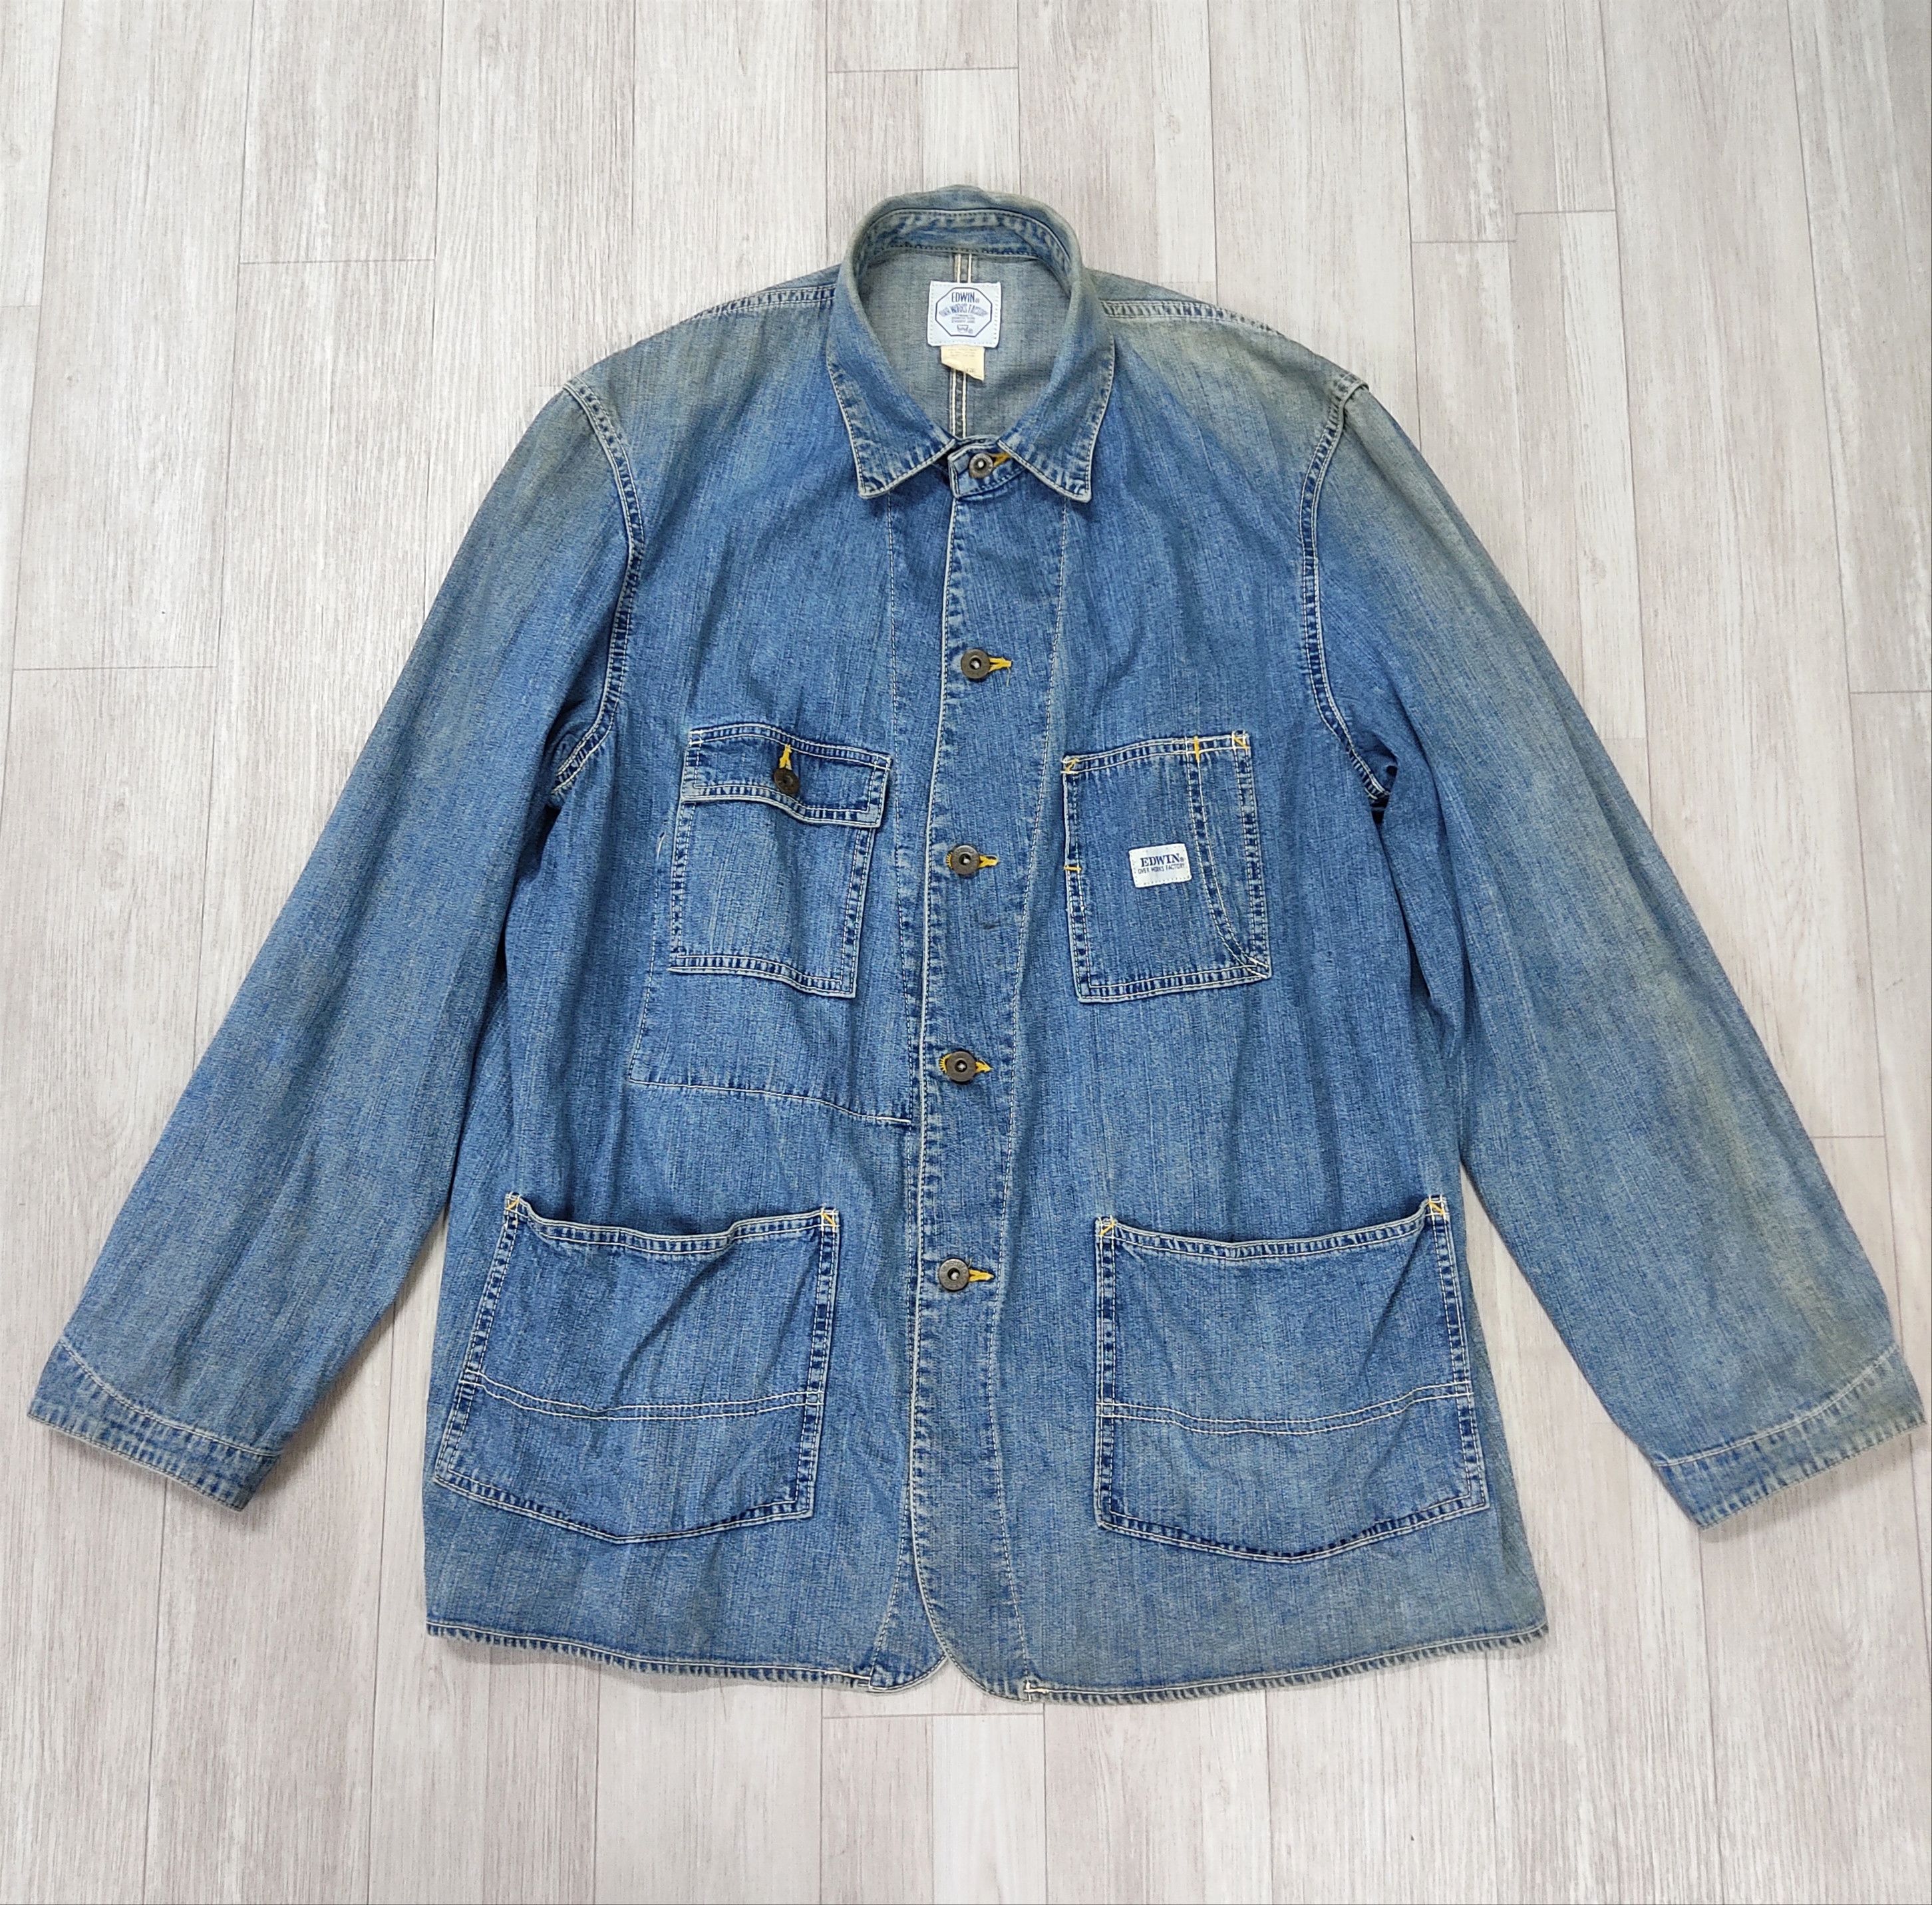 Vintage EDWIN Over Works Factory Chore Jacket - 4